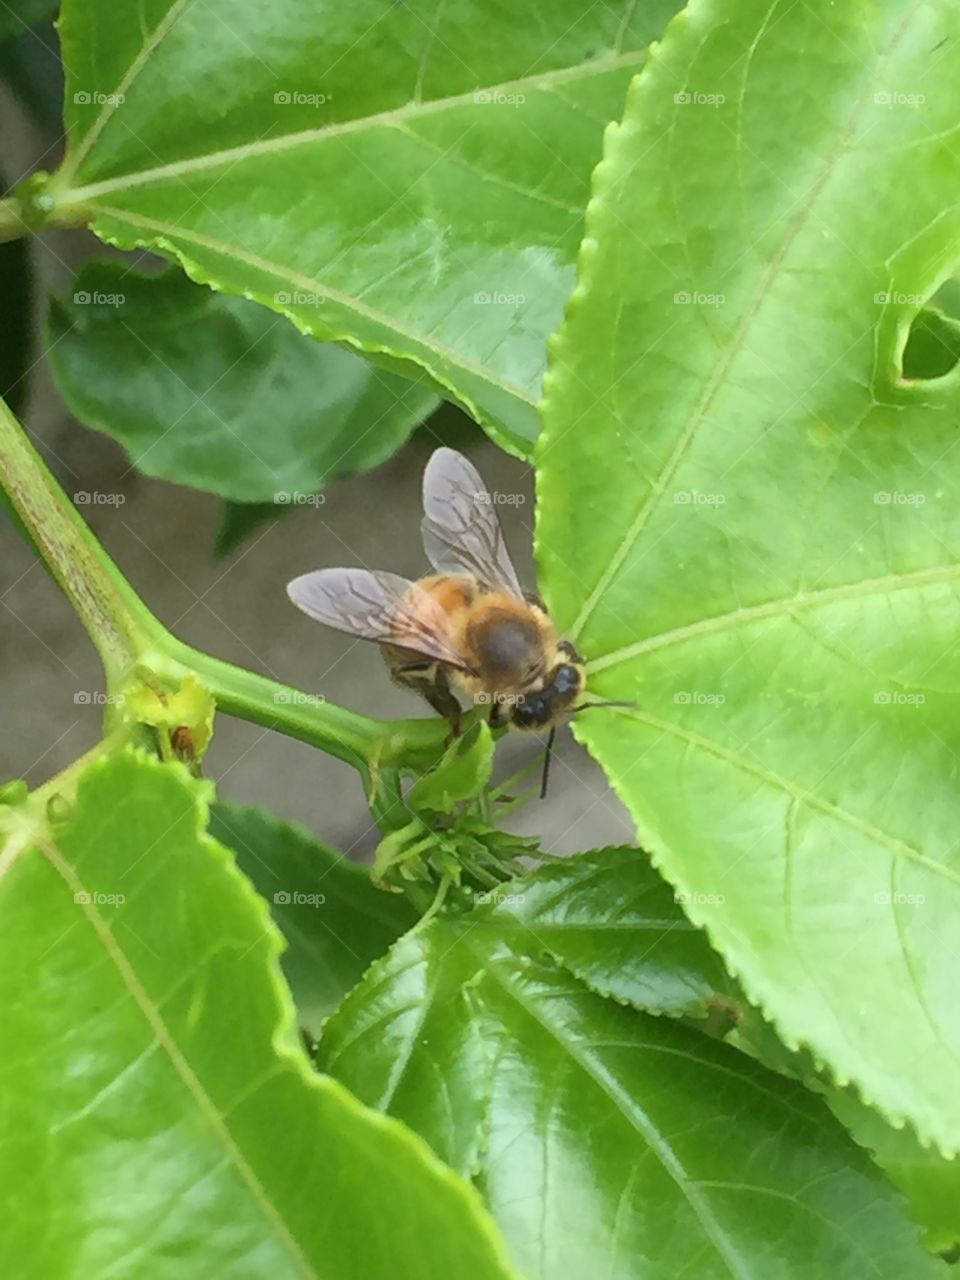 A bee with hope to find some flowers before fall comes.